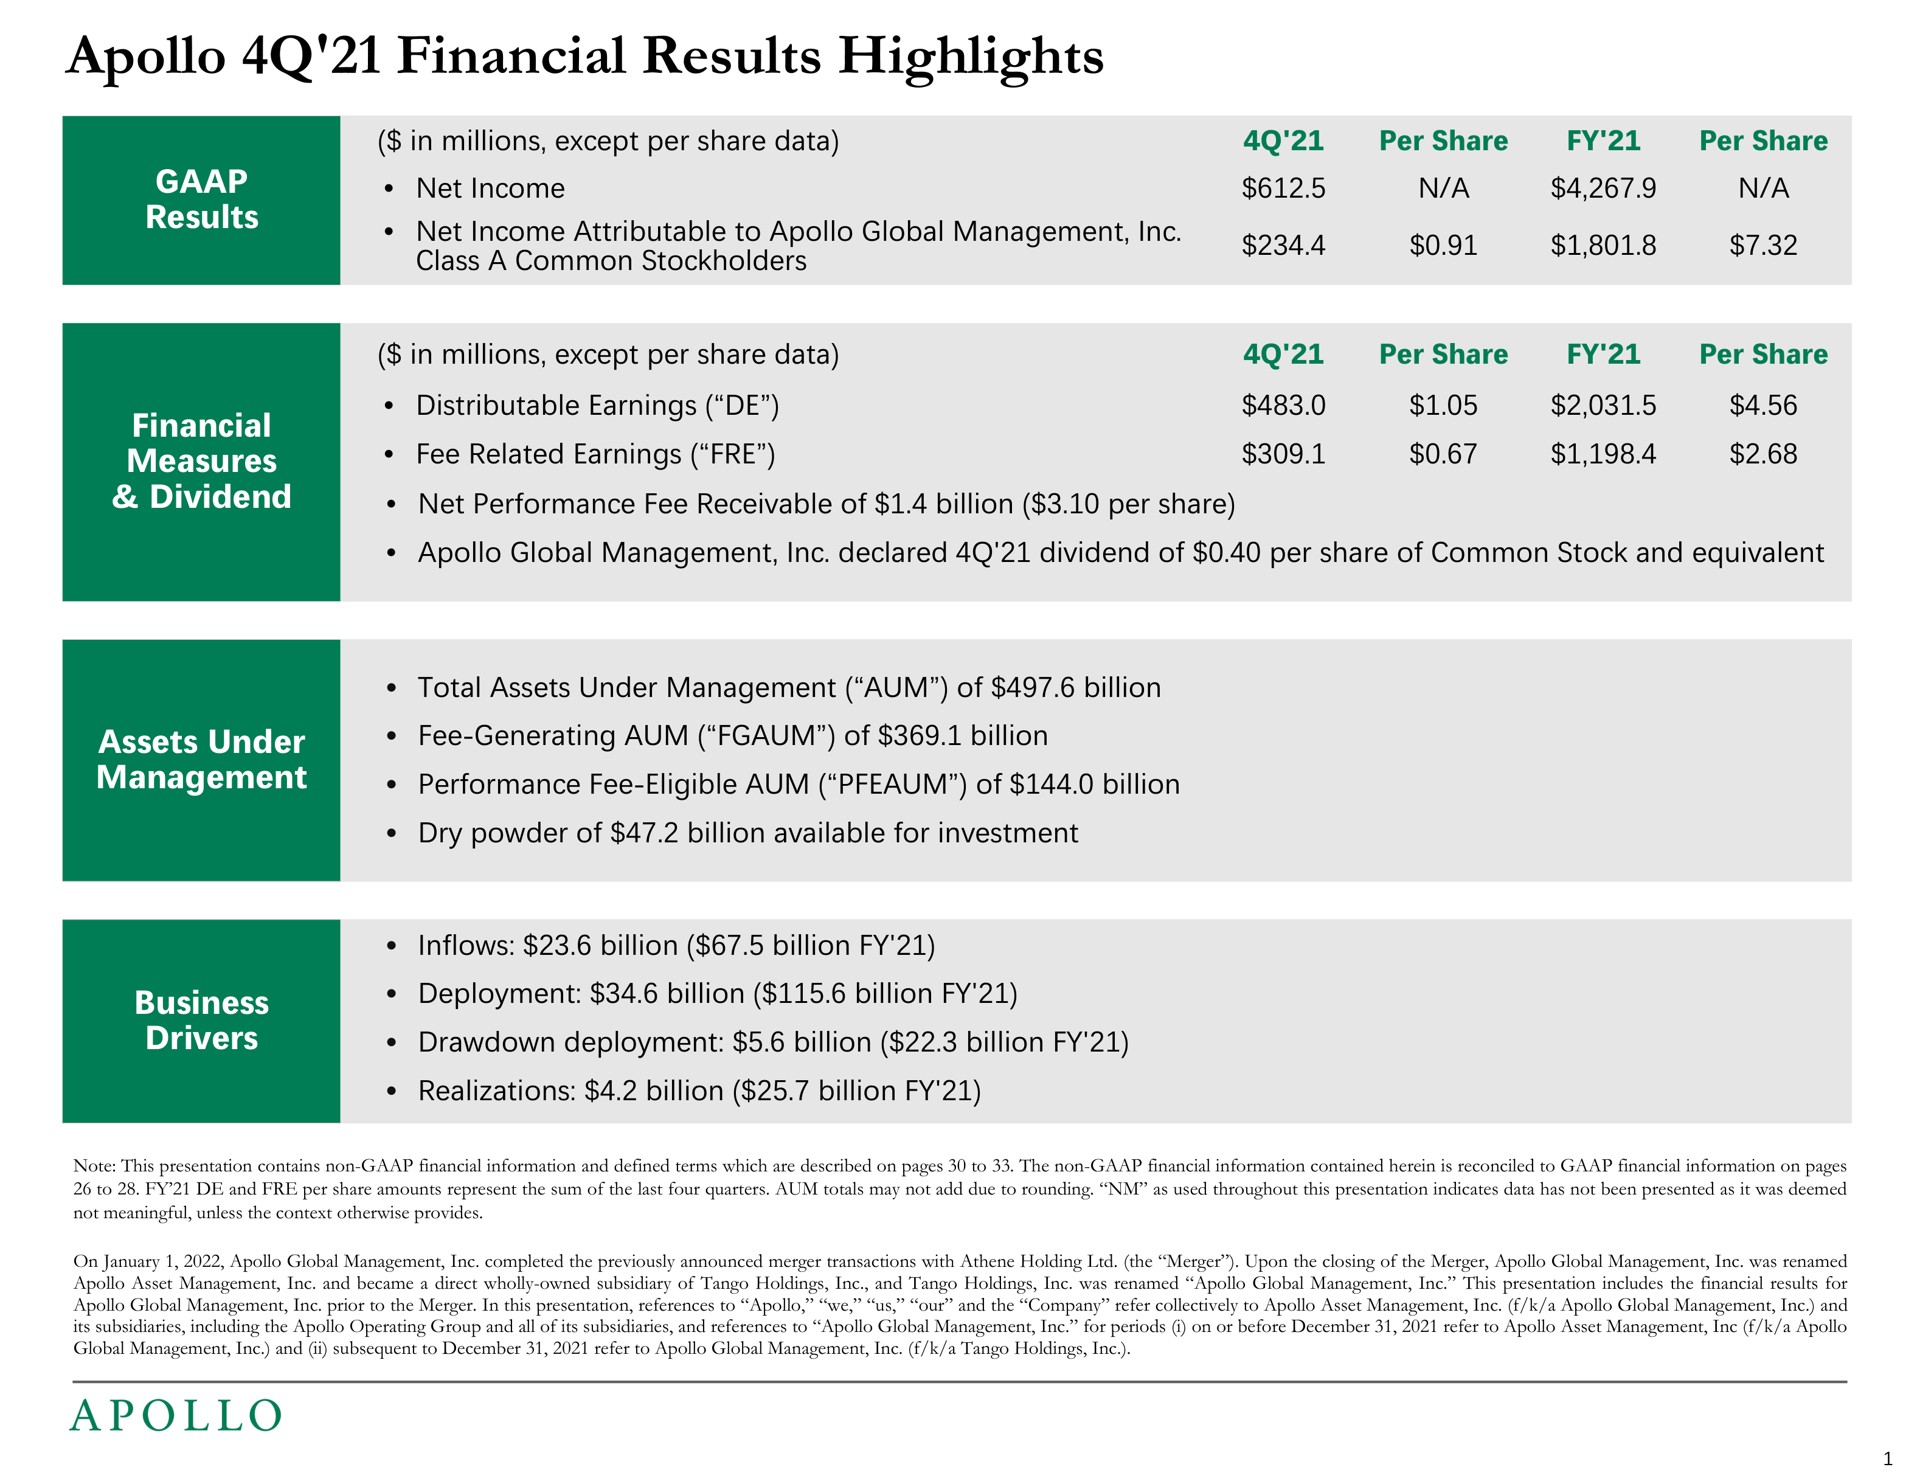 financial results highlights results financial measures dividend assets under management business drivers net income net income attributable to global a a distributable earnings fee related earnings net performance fee receivable of billion per share fee generating aum of billion performance fee eligible aum of billion inflows billion billion deployment billion billion drawdown deployment billion billion realizations billion billion | Apollo Global Management